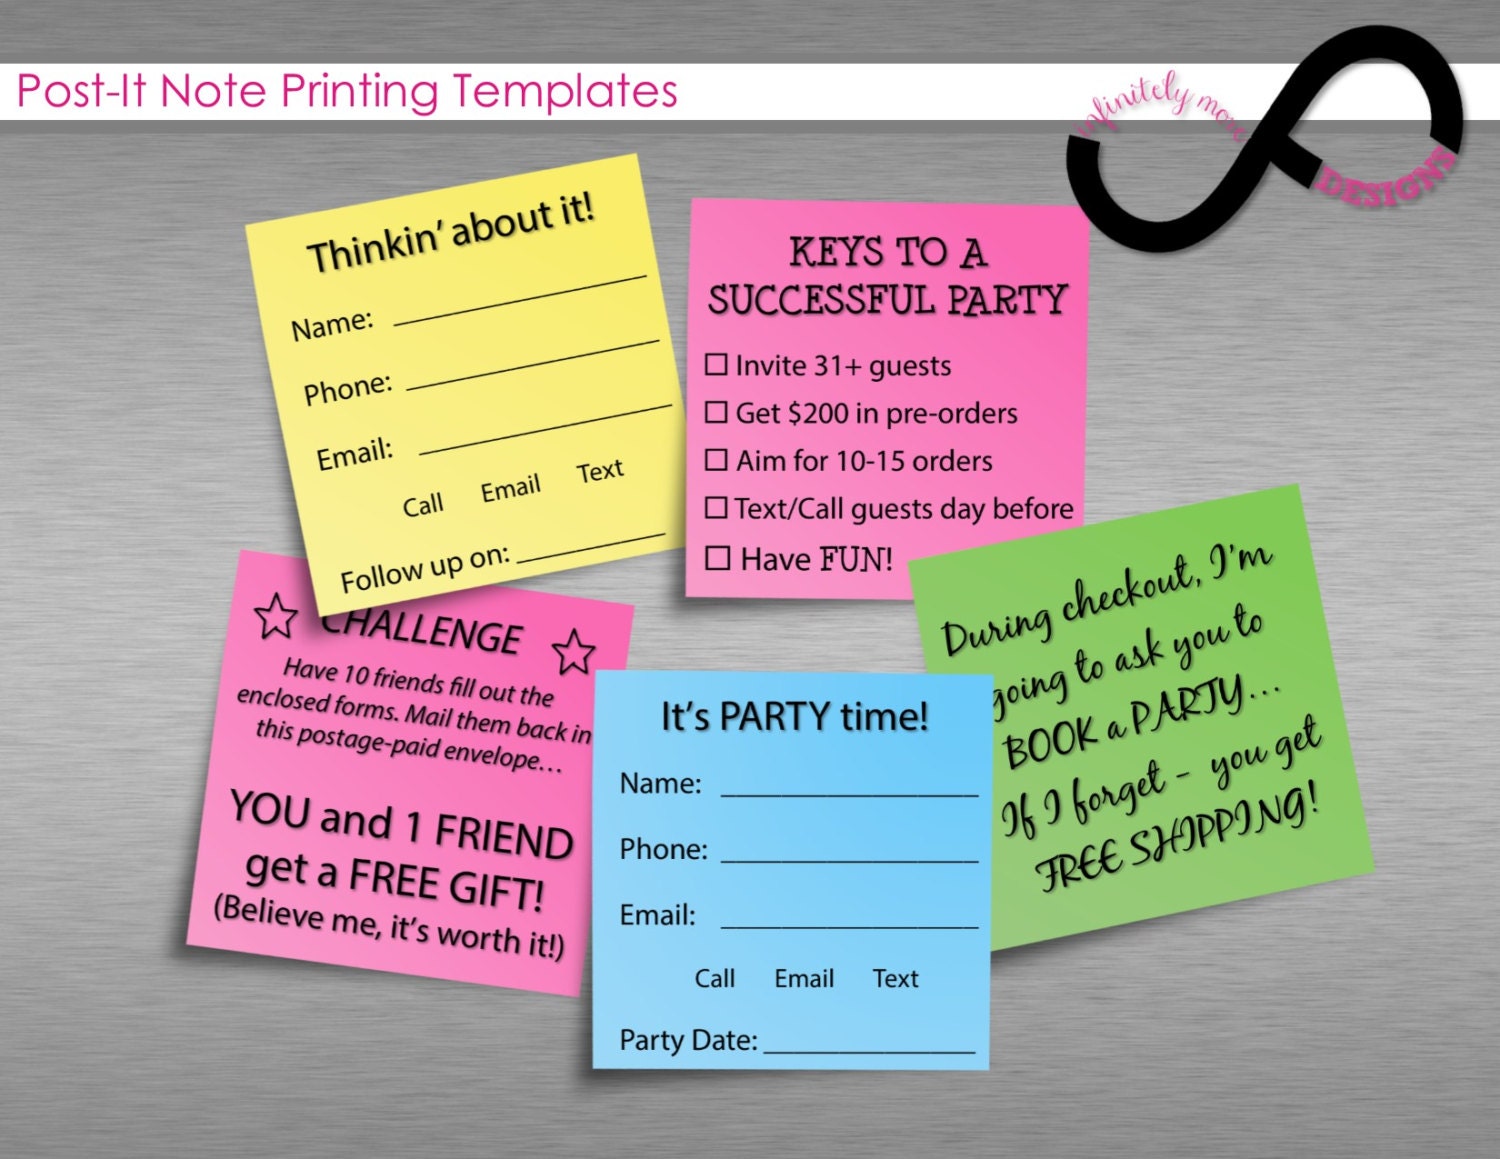 Post-It Note Printing Templates INSTANT by InfinitelyMore ...